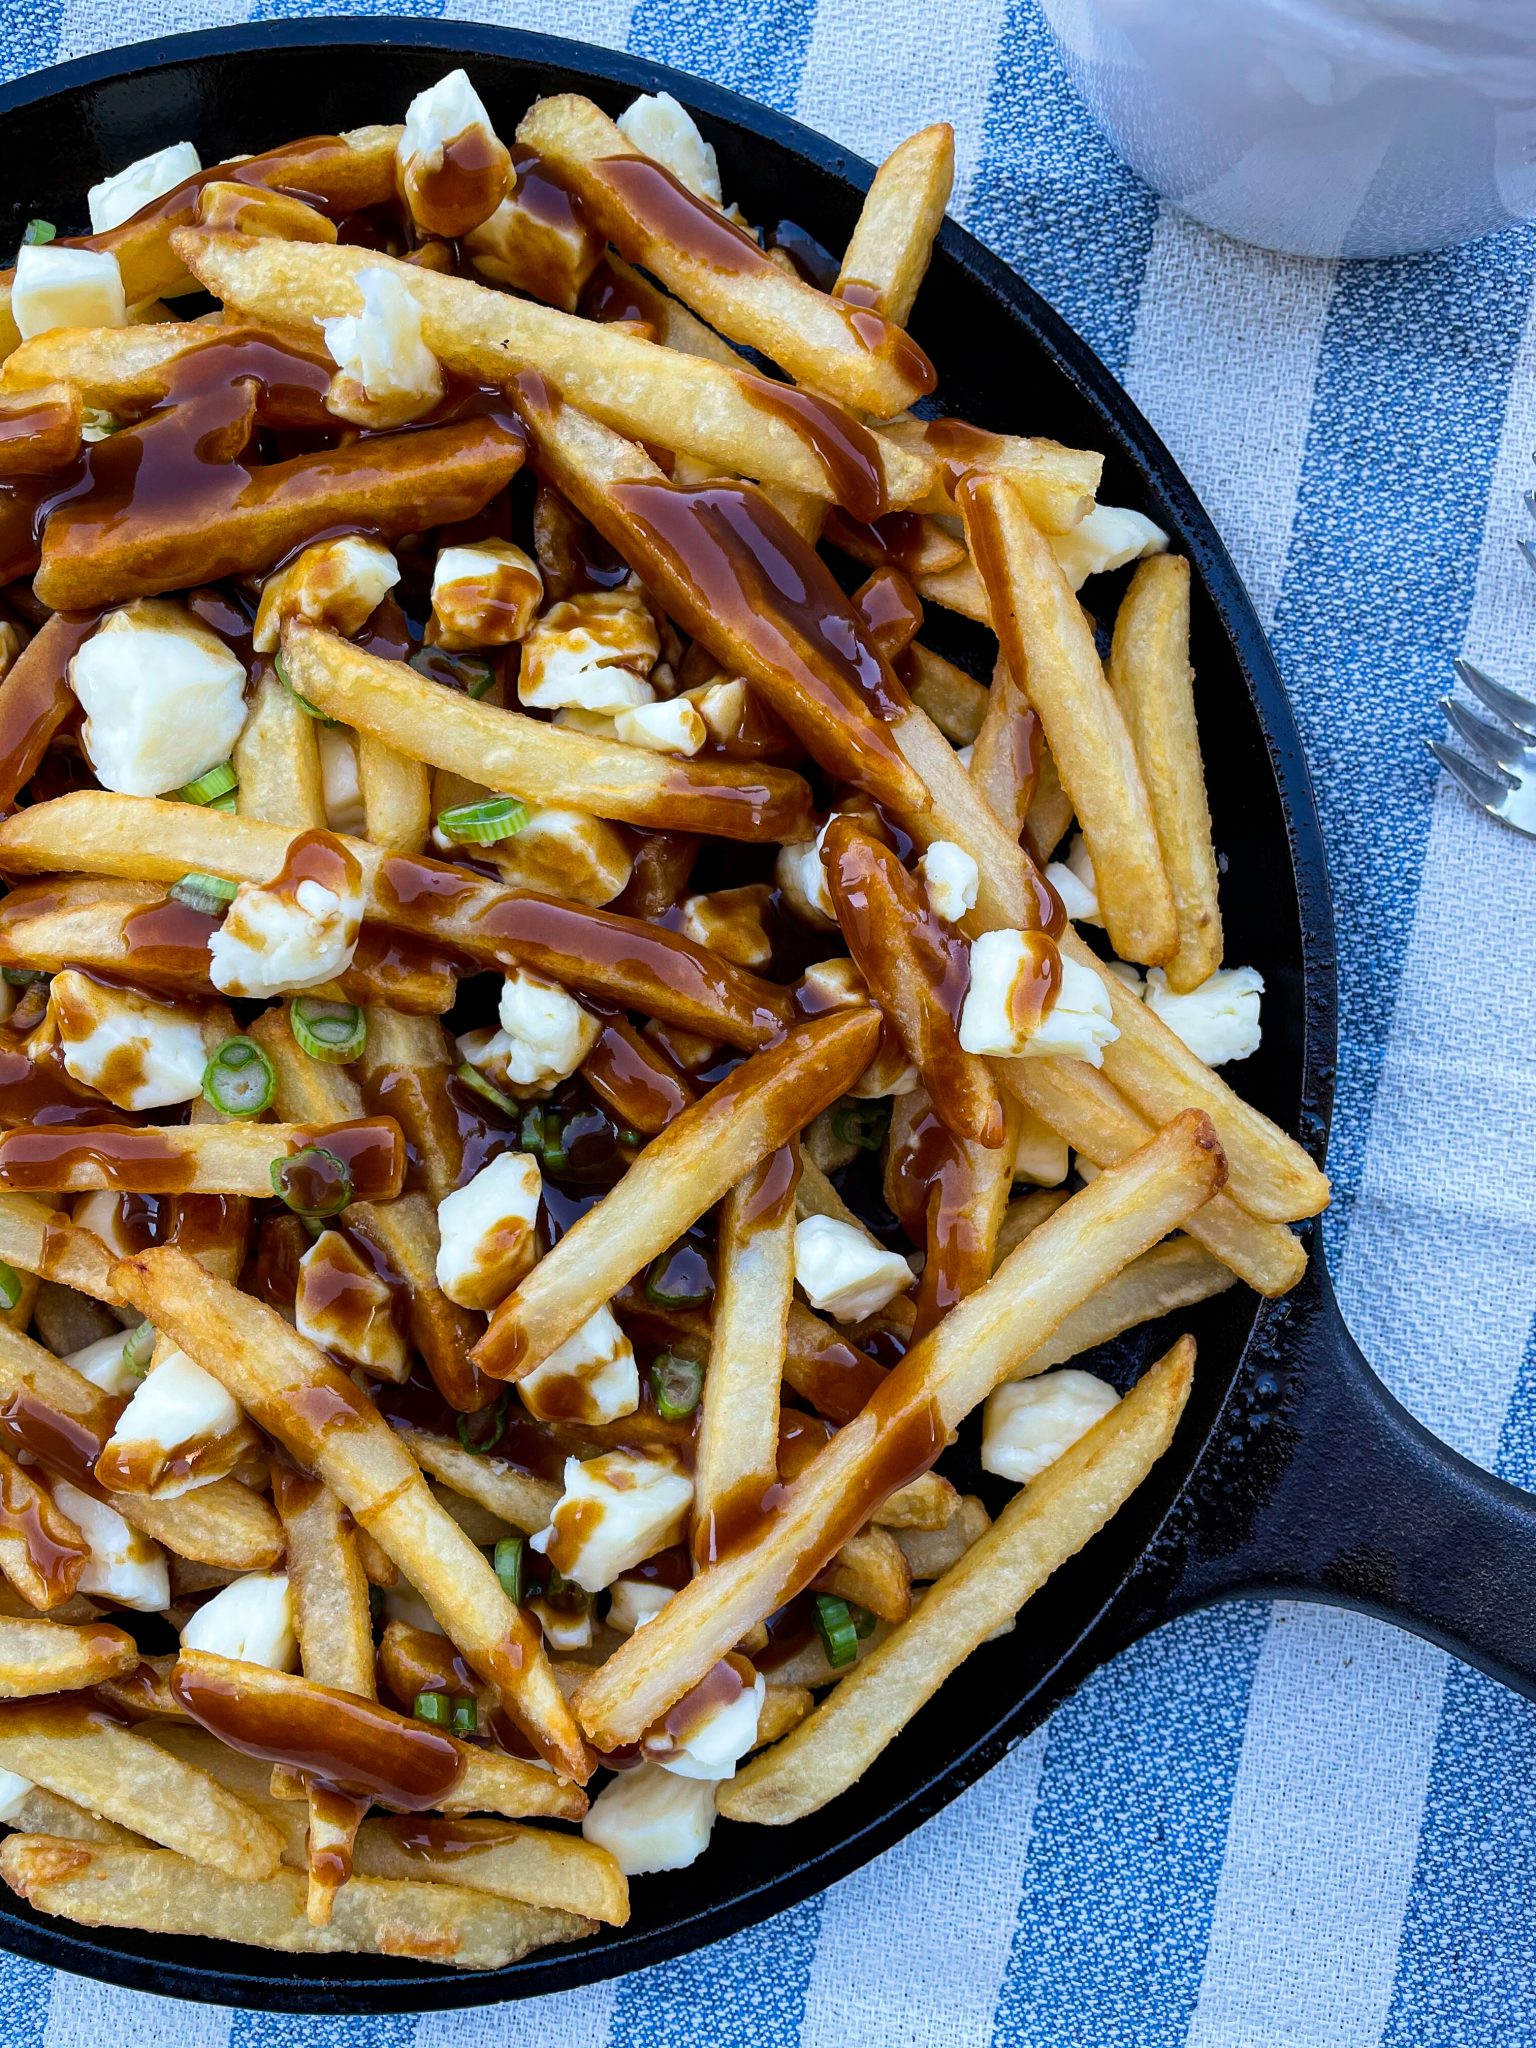 Easy Poutine | A Canadian Dish of French Fries, Cheese Curds, and Gravy